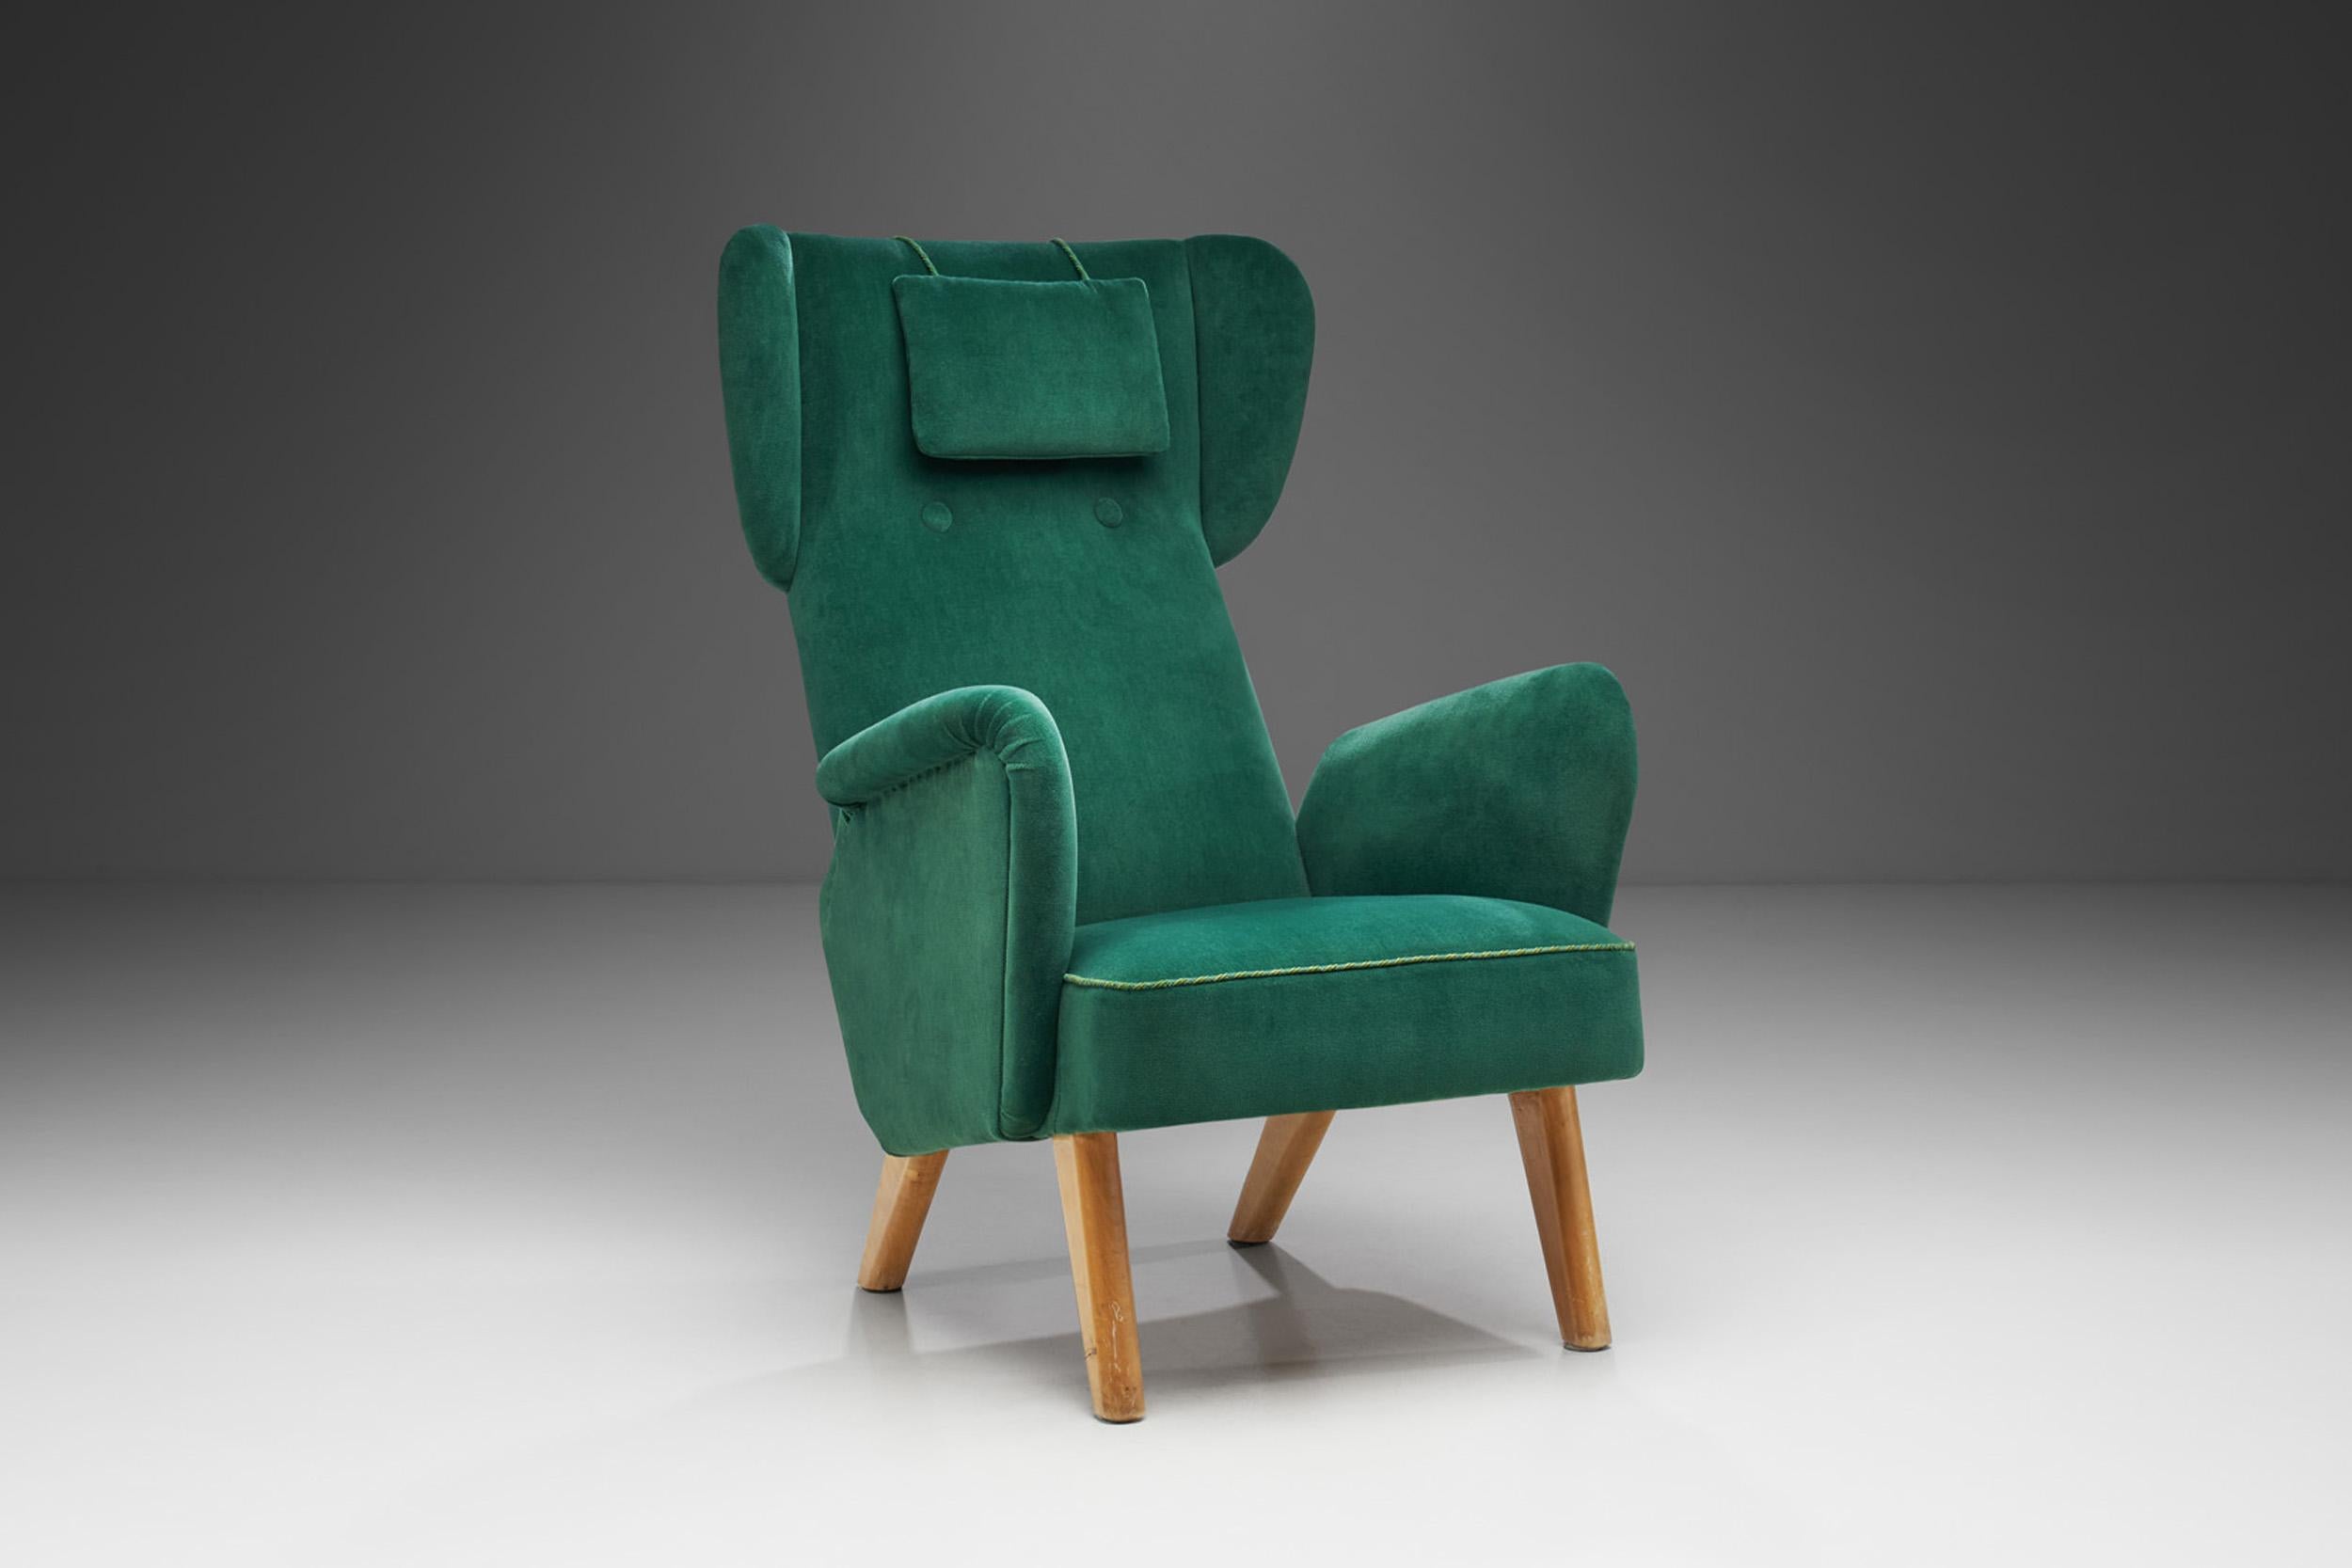 The seating designs of the architect/designer, Carl Gustaf Hiort Af Ornäs, have been gradually more and more recognized world-wide, which resulted in the recent exhibition titled “Forgotten Ornäs”. His designs, including this armchair, are defined